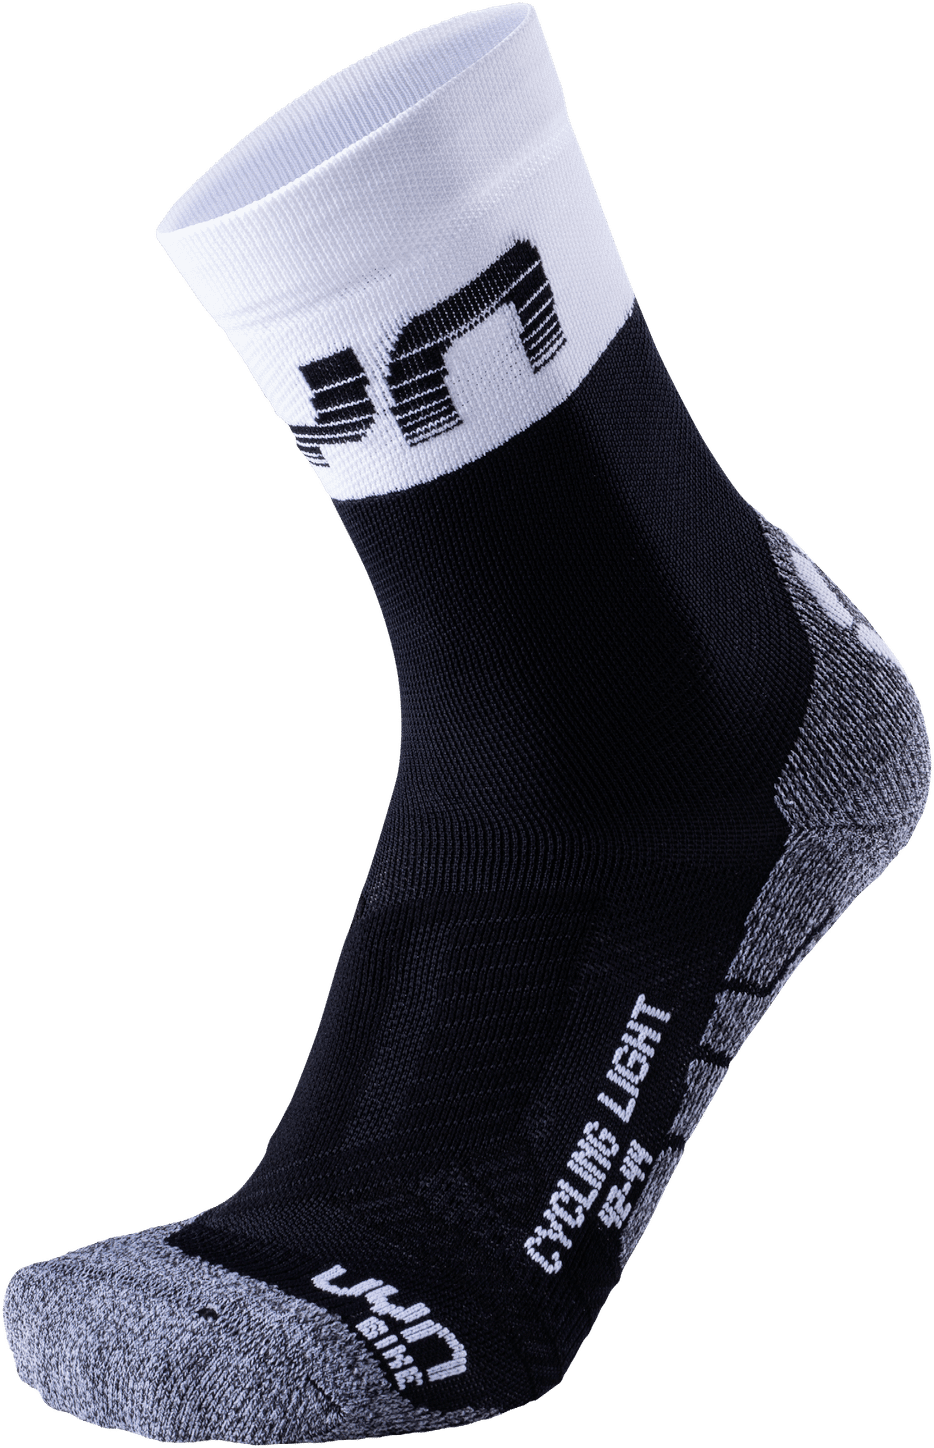 Uyn Light - Calcetines ciclismo - Hombre